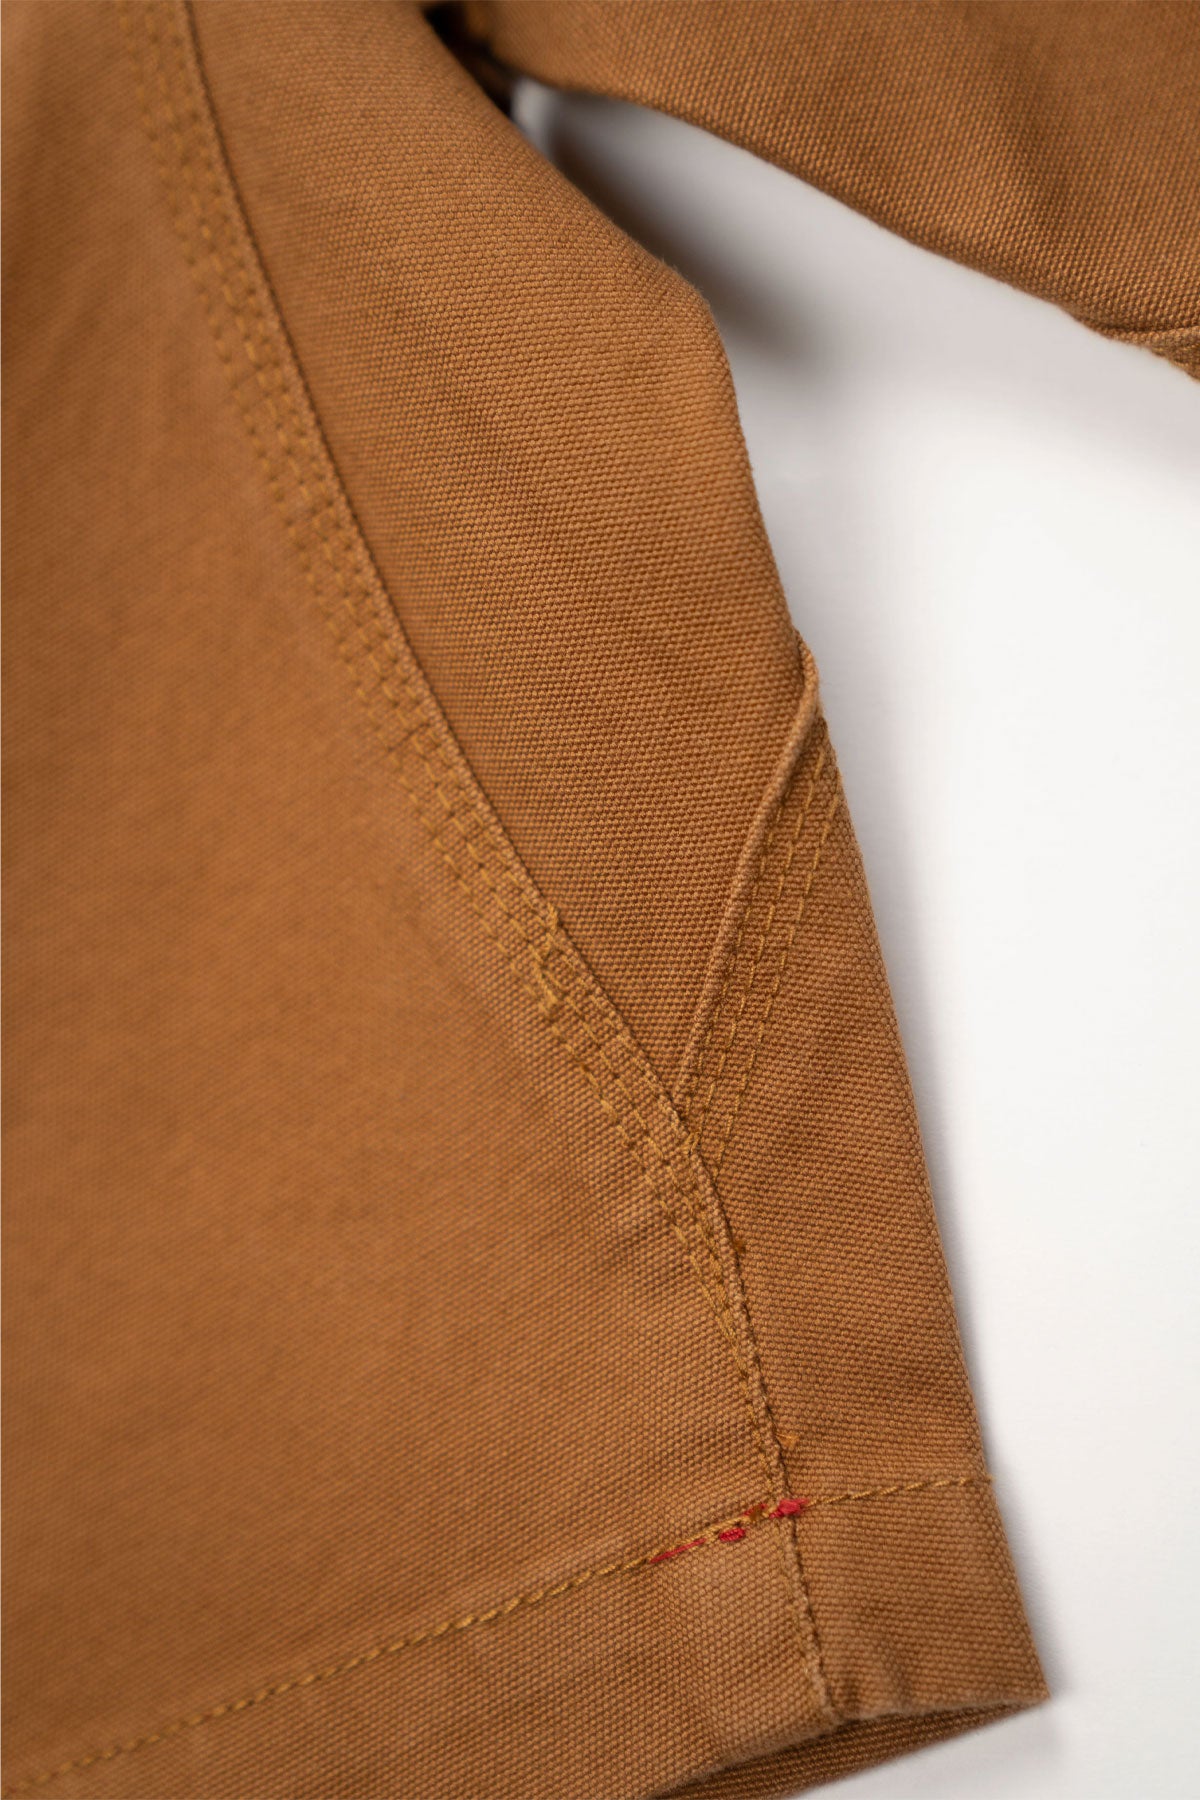 Iron And Resin - Nomad Utility Canvas Shorts in Cognac